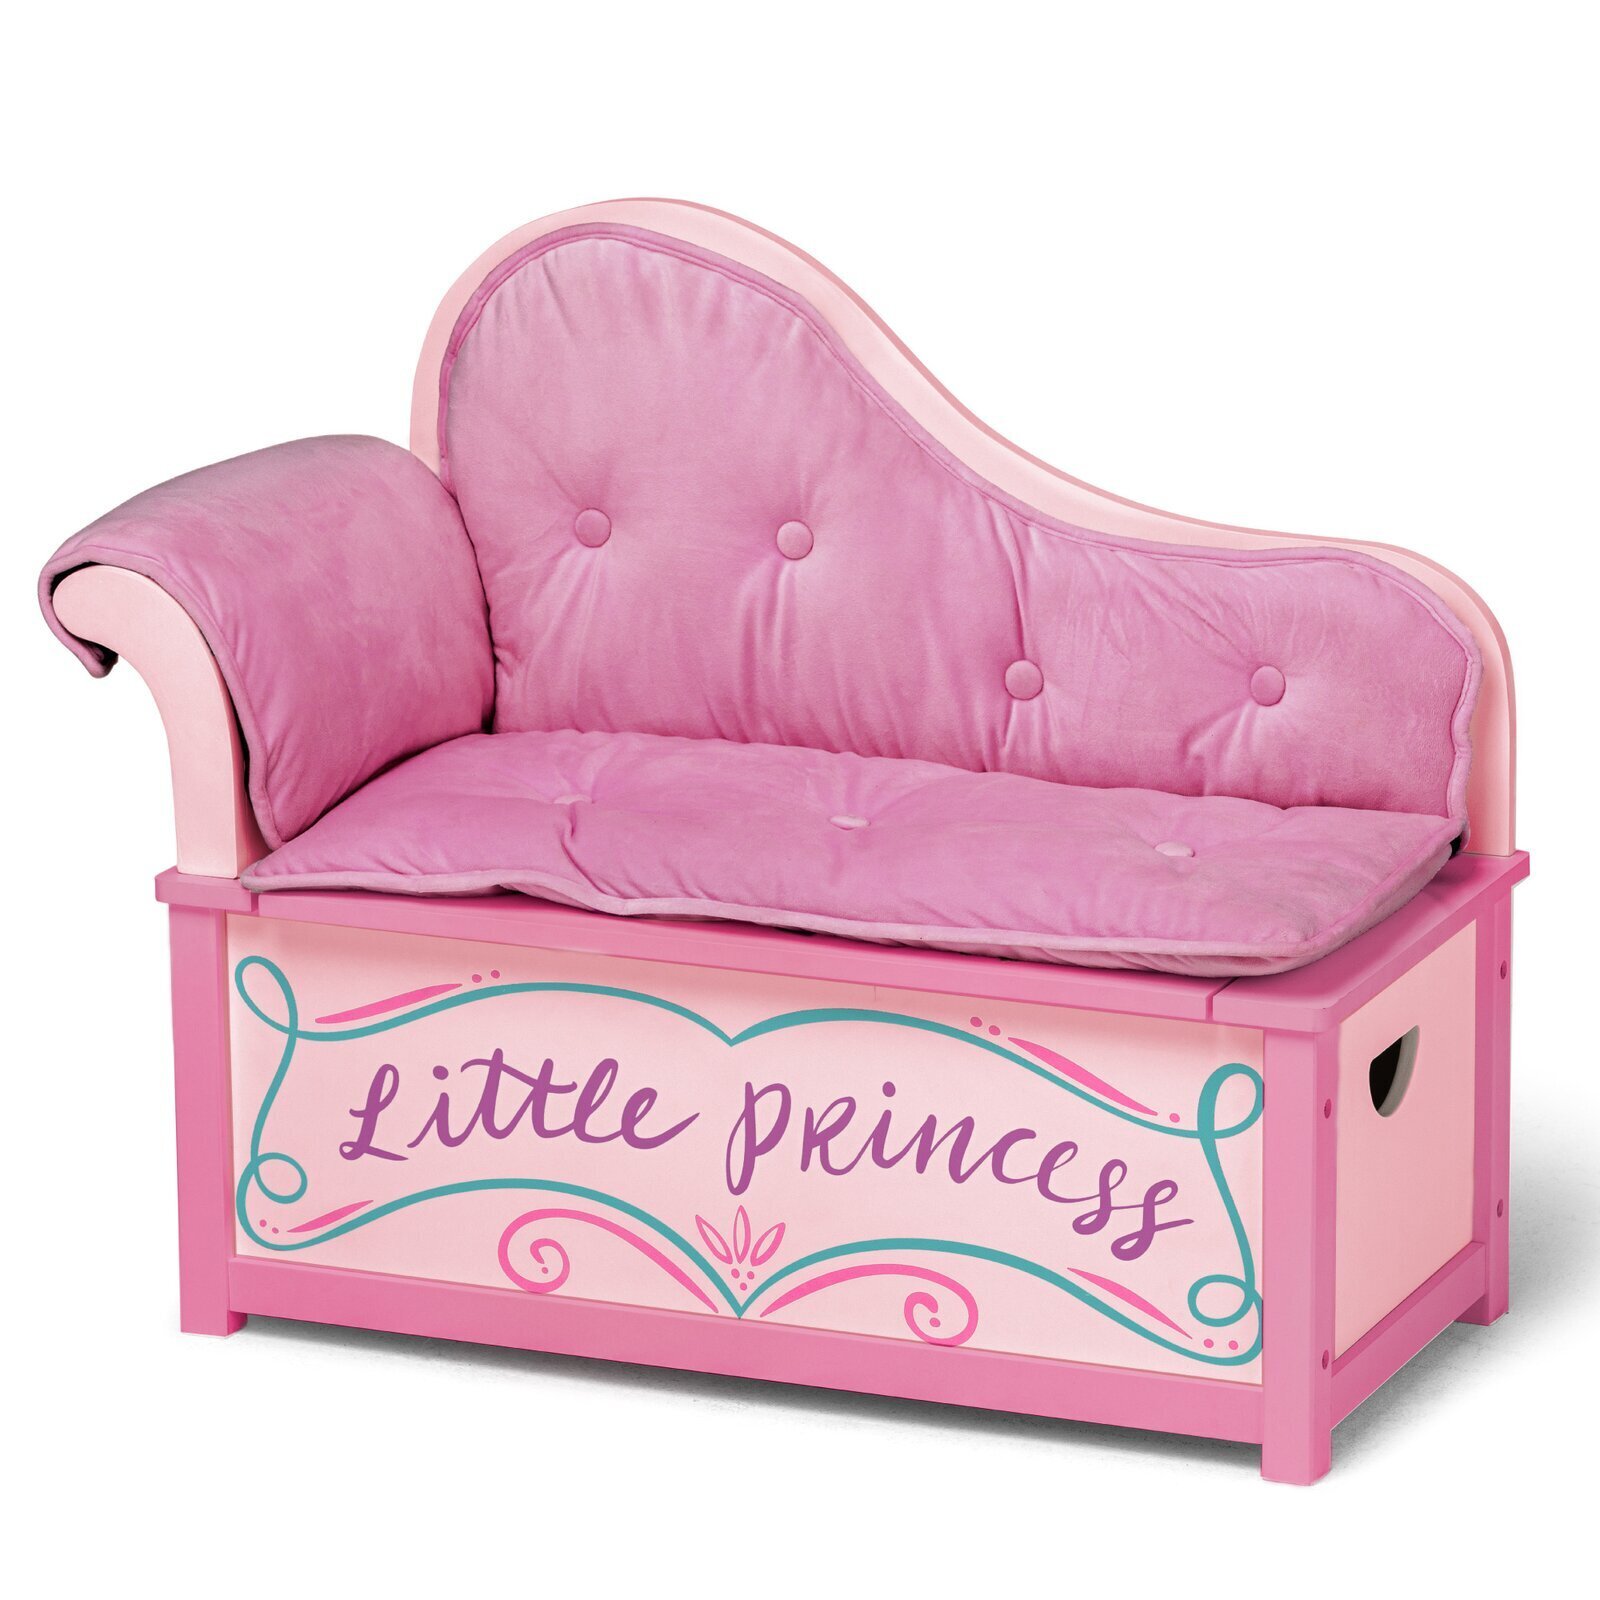 Princess themed Pink Lounge for Kids